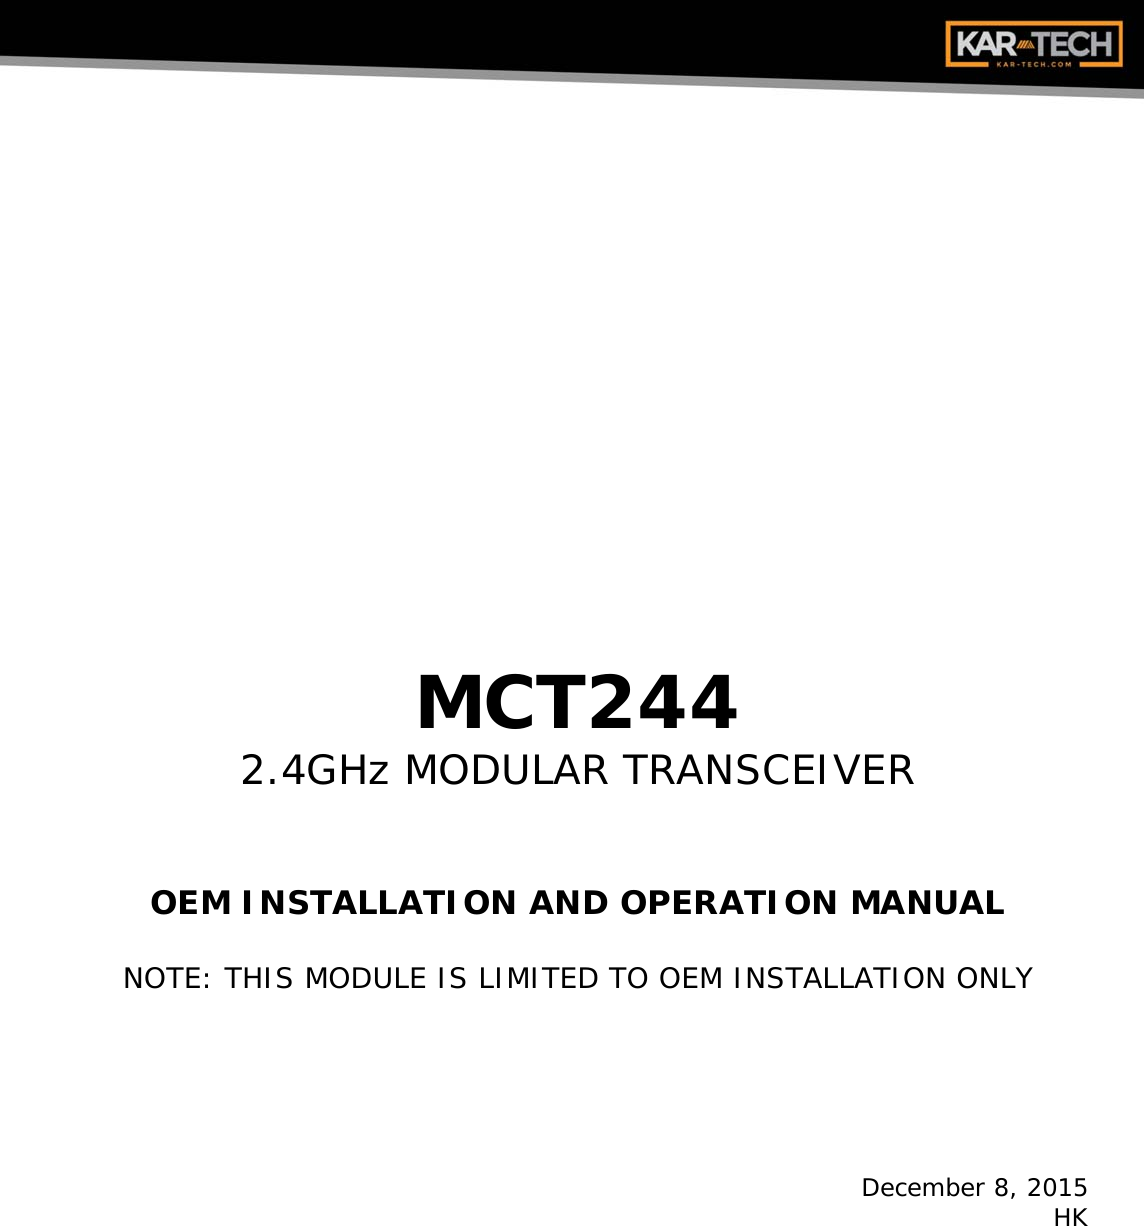        MCT244 2.4GHz MODULAR TRANSCEIVER    OEM INSTALLATION AND OPERATION MANUAL  NOTE: THIS MODULE IS LIMITED TO OEM INSTALLATION ONLY       December 8, 2015 HK 